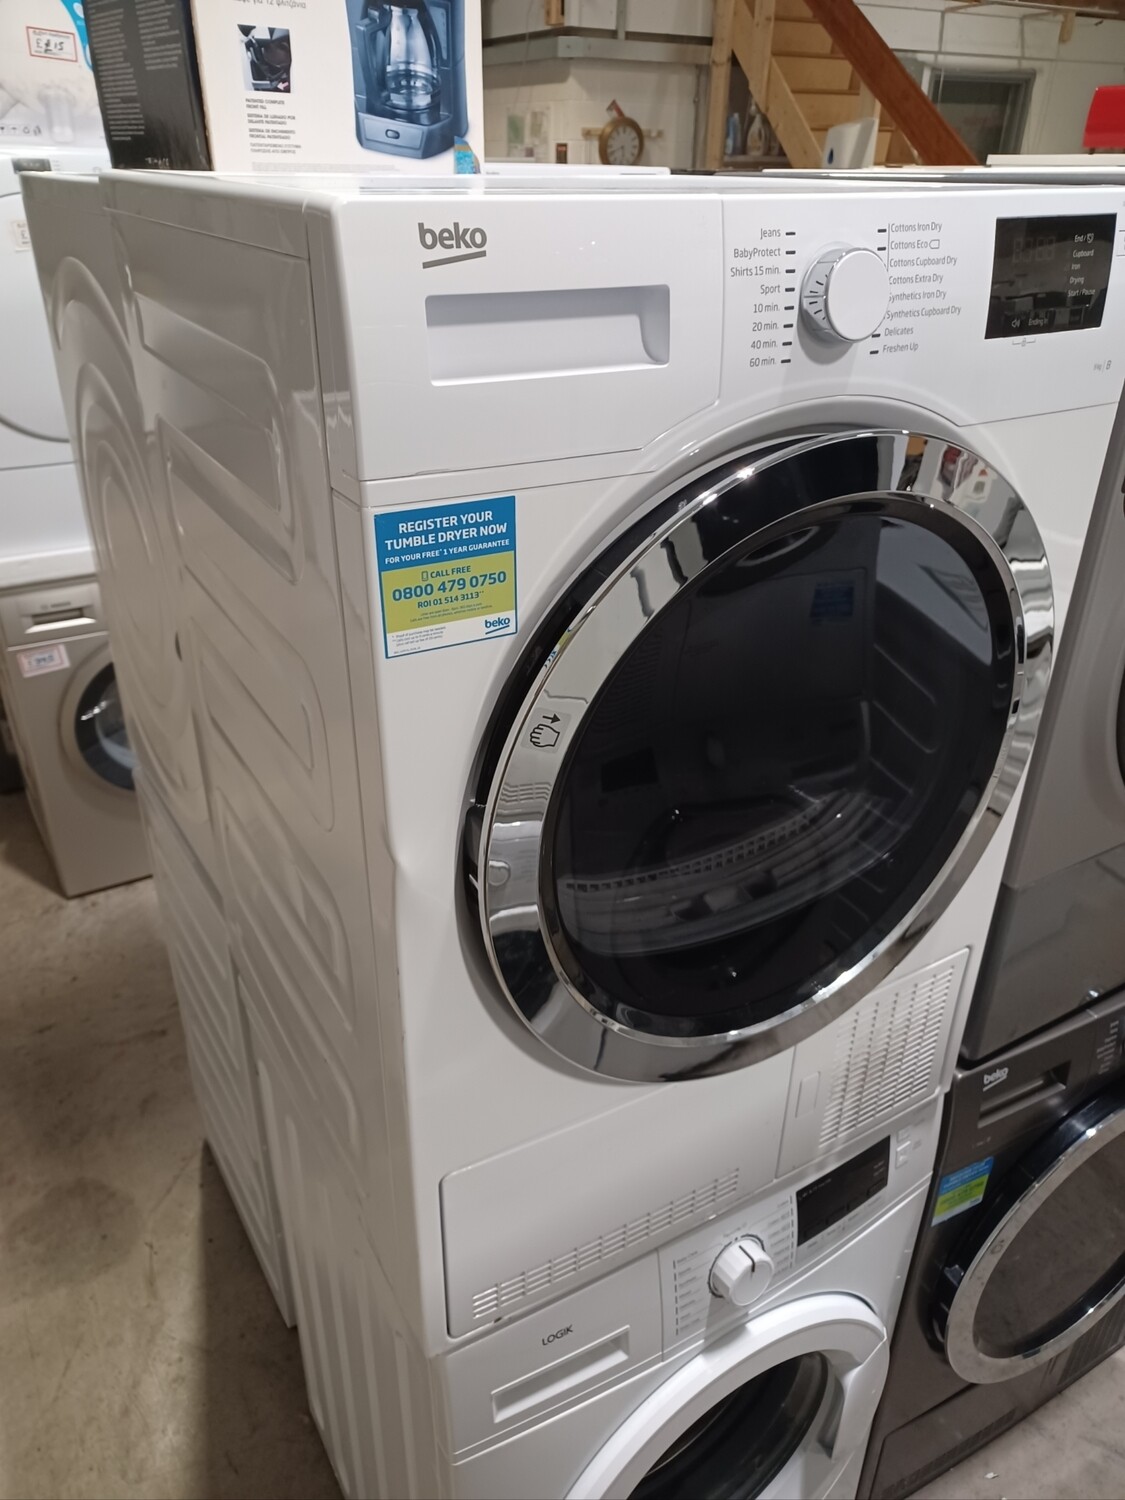 Beko DCR93161W 9Kg Condenser Dryer White Refurbished 6 Months Guarantee. This item is located in our Whitby Road Shop 